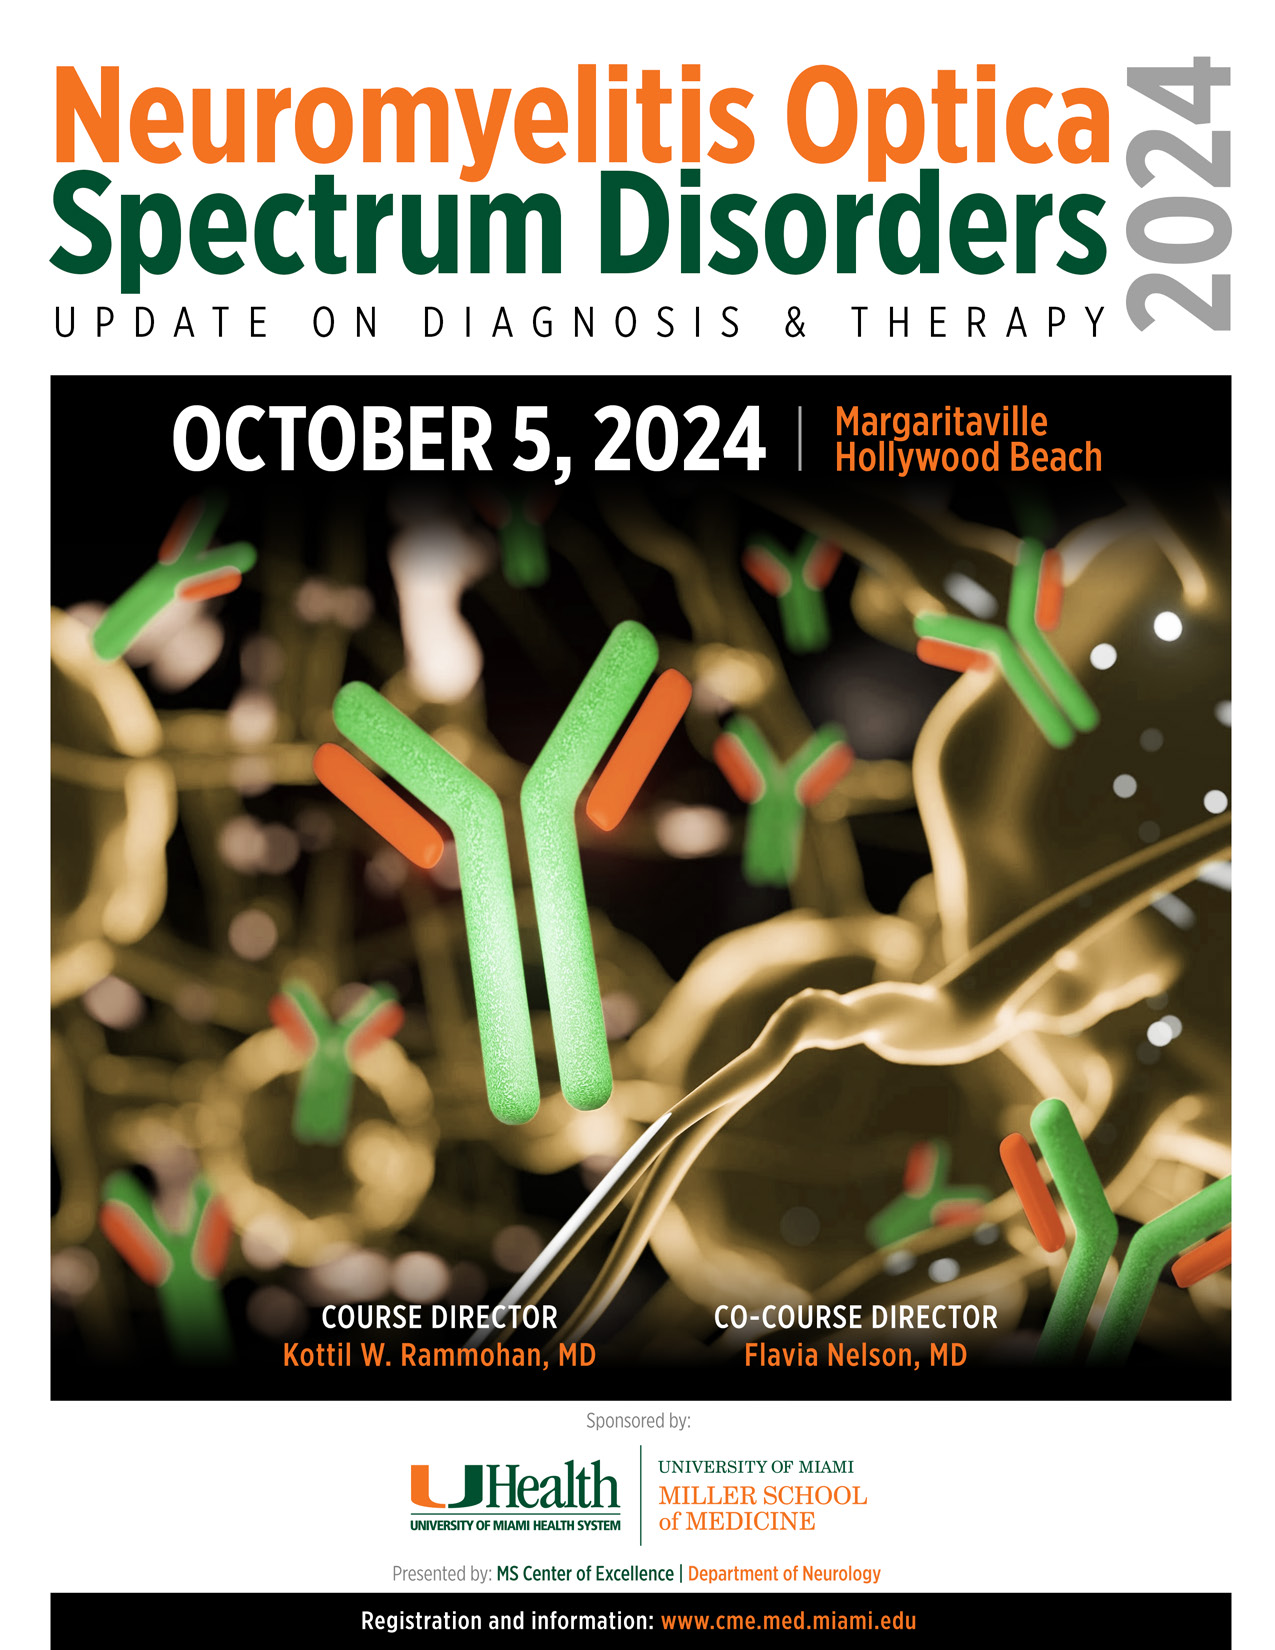 Neuromyelitis Optica Spectrum Disorders 2024:  Update on Diagnosis and Therapy Banner